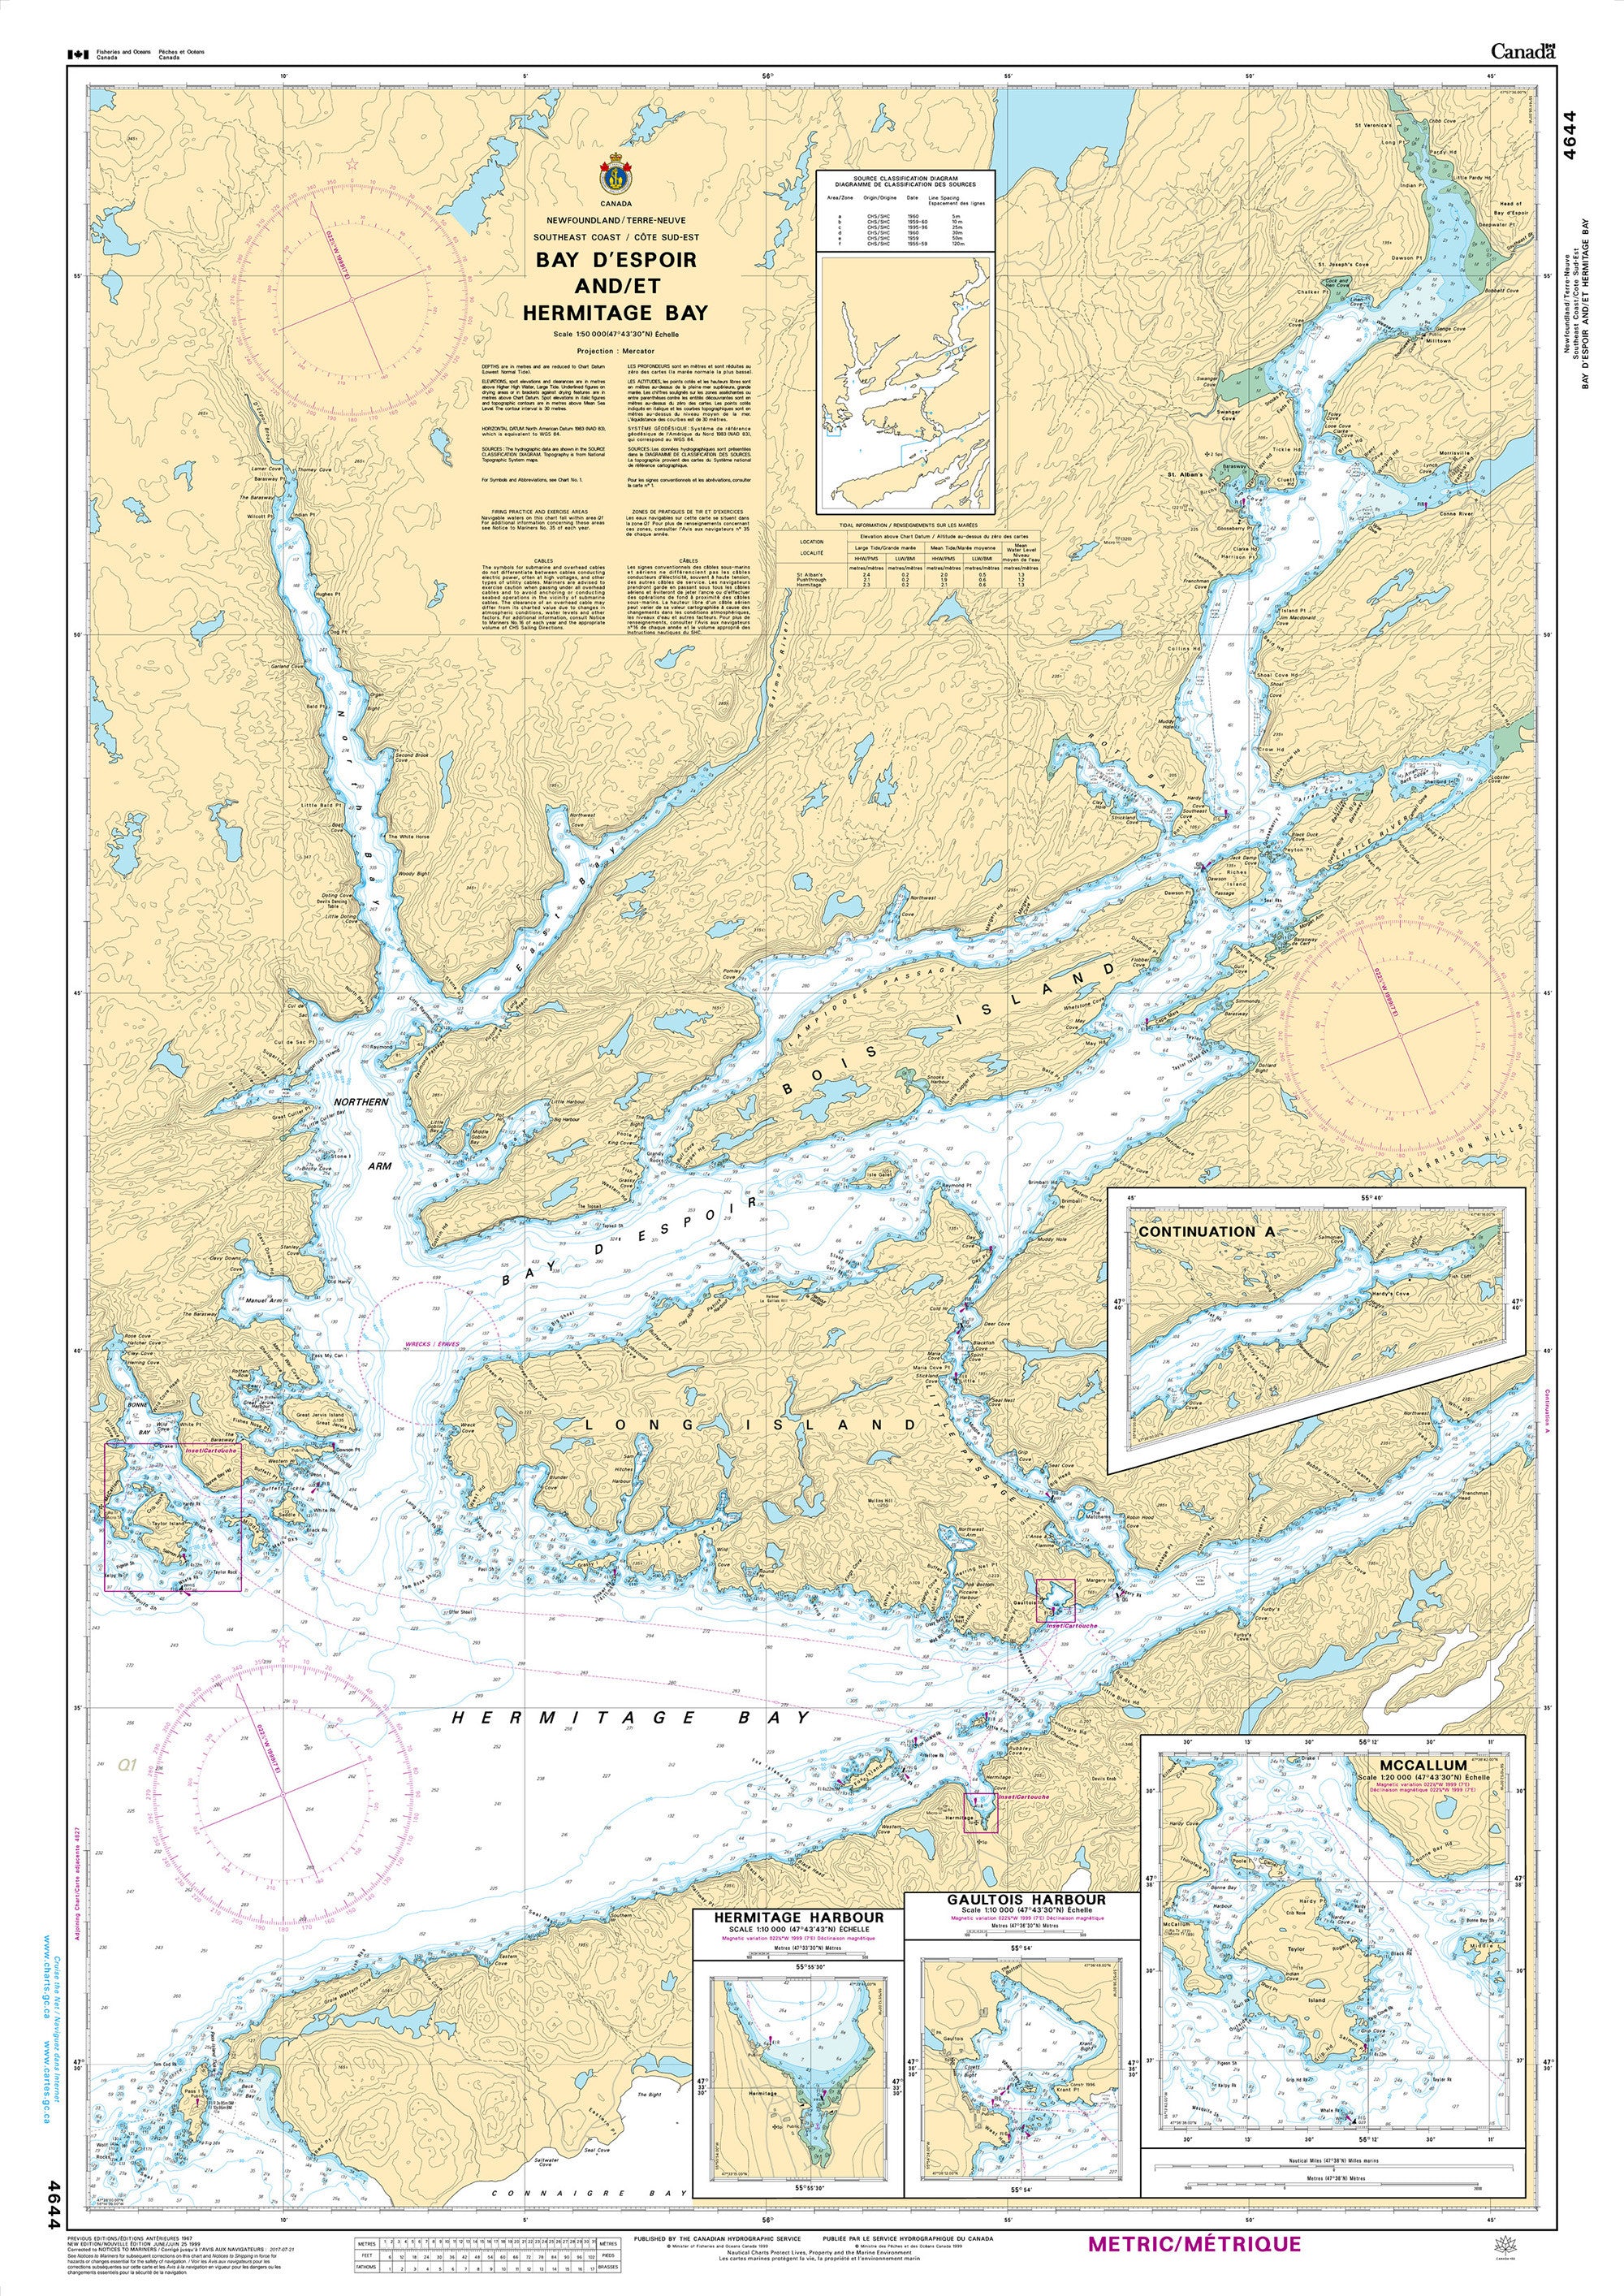 Canadian Hydrographic Service Nautical Chart CHS4644: Bay D'Espoir and/et Hermitage Bay